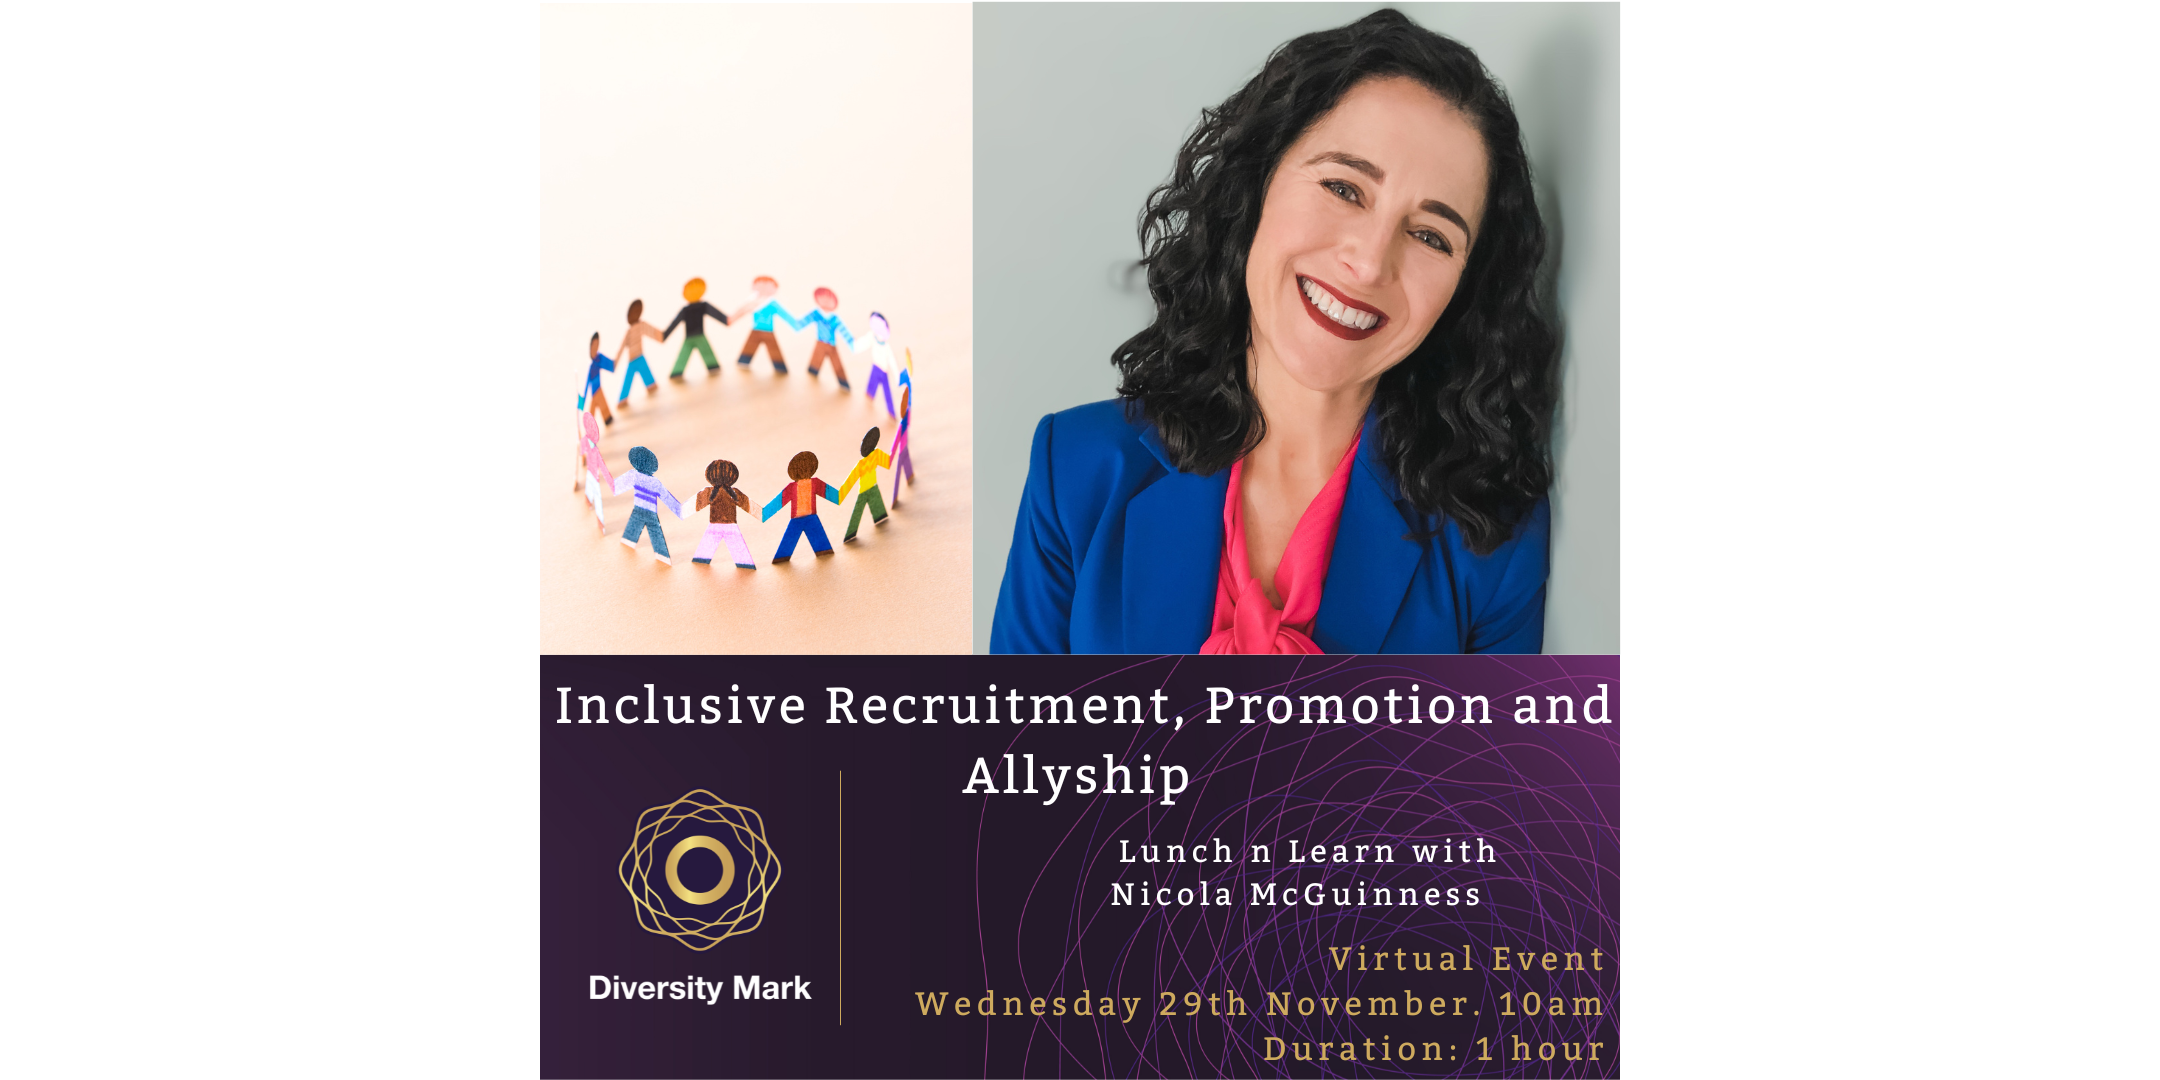 Inclusive Recruitment, Promotion and AllyshipNovember 29, 2023We have Nicola McGuinness in this ‘Lunch n Learn’ session who will talk through the basics of inclusive recruitment from the initial job specification to advertising, interviewing and onboarding, thus ensuring you are doing all you can to attract a diverse talent pool.  
The session will highlight good practices when it comes to retention and advancement of your female talent. Nicola will finish up touching on ‘Allyship’ and the importance of standing up against inequality and supporting and advocating for the underprivileged.
Nicola is an experienced coach and leadership consultant whose mission is to ensure that workplace is an environment where people can create a meaningful impact and gain fulfilment from their role. 
Nicola is deeply passionate about gender equality which has led to her founding and continuing to lead the Lean In Network located in Newry. The organisation has over 400 members. She also delivers EDI programmes through her own business and for Lean In across the world which has resulted in an expanded cultural awareness and understanding of the unique challenges women and under-represented groups face in the workplace.